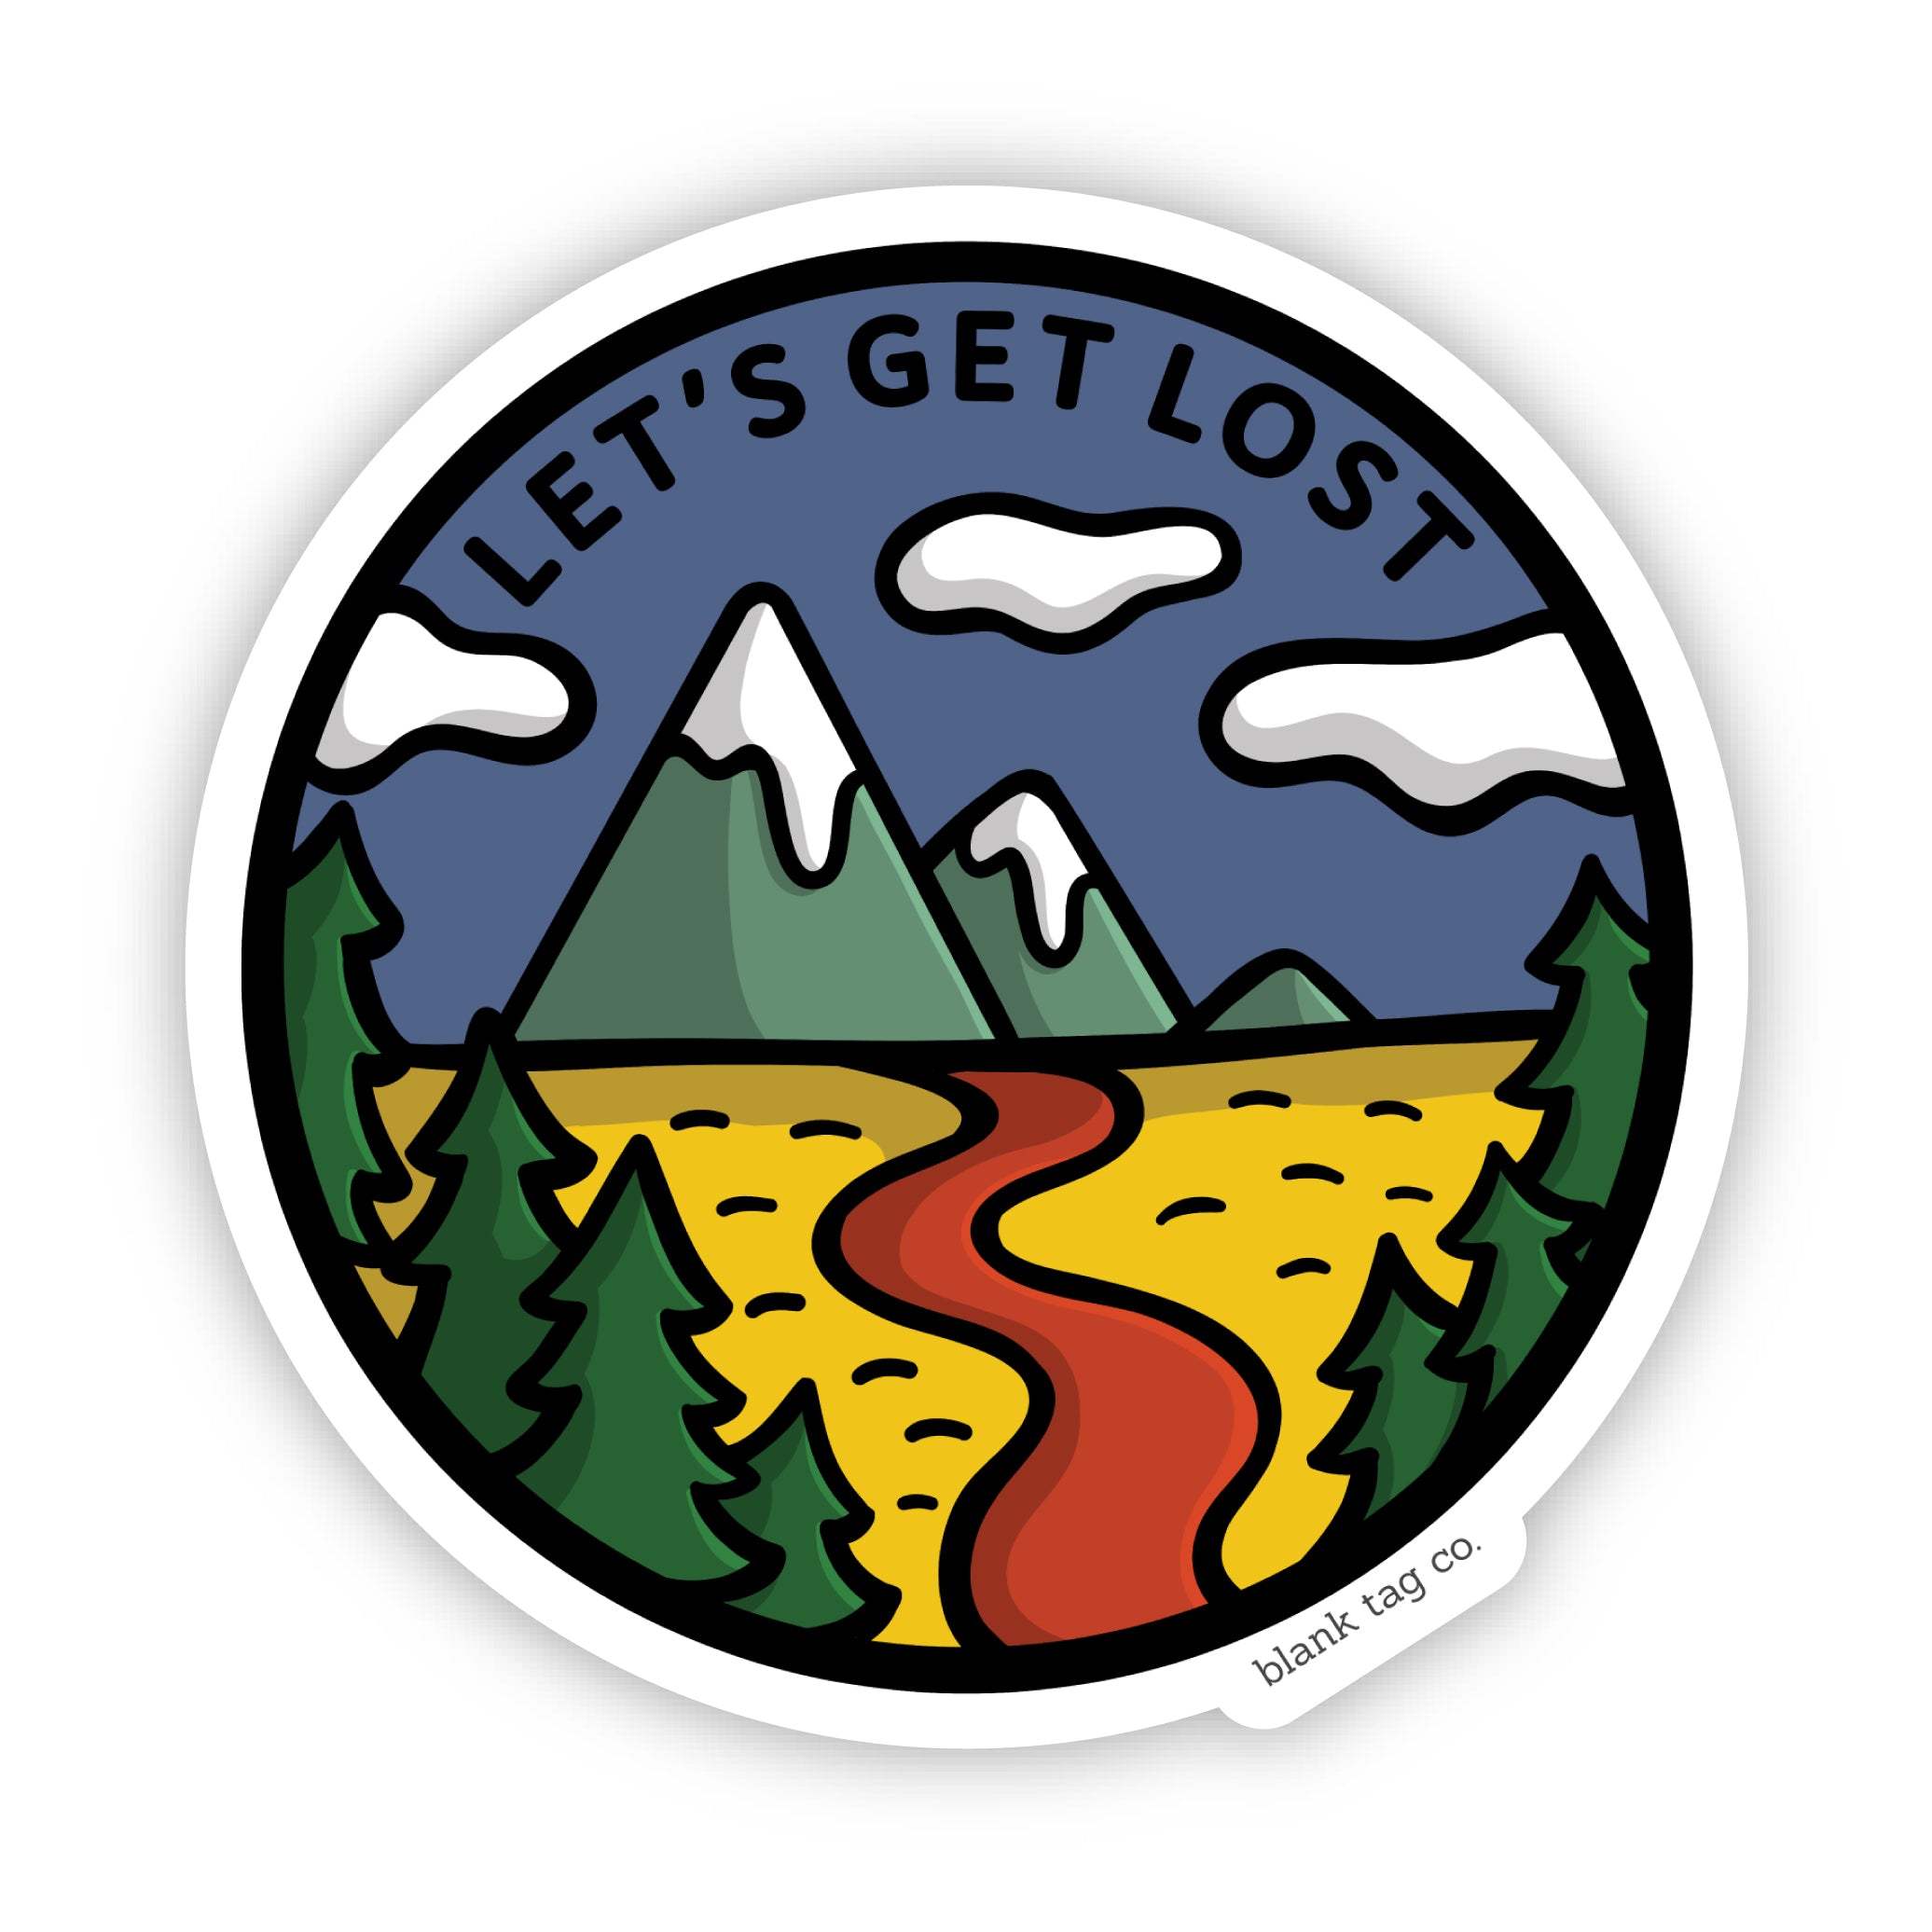 The Let's Get Lost Sticker